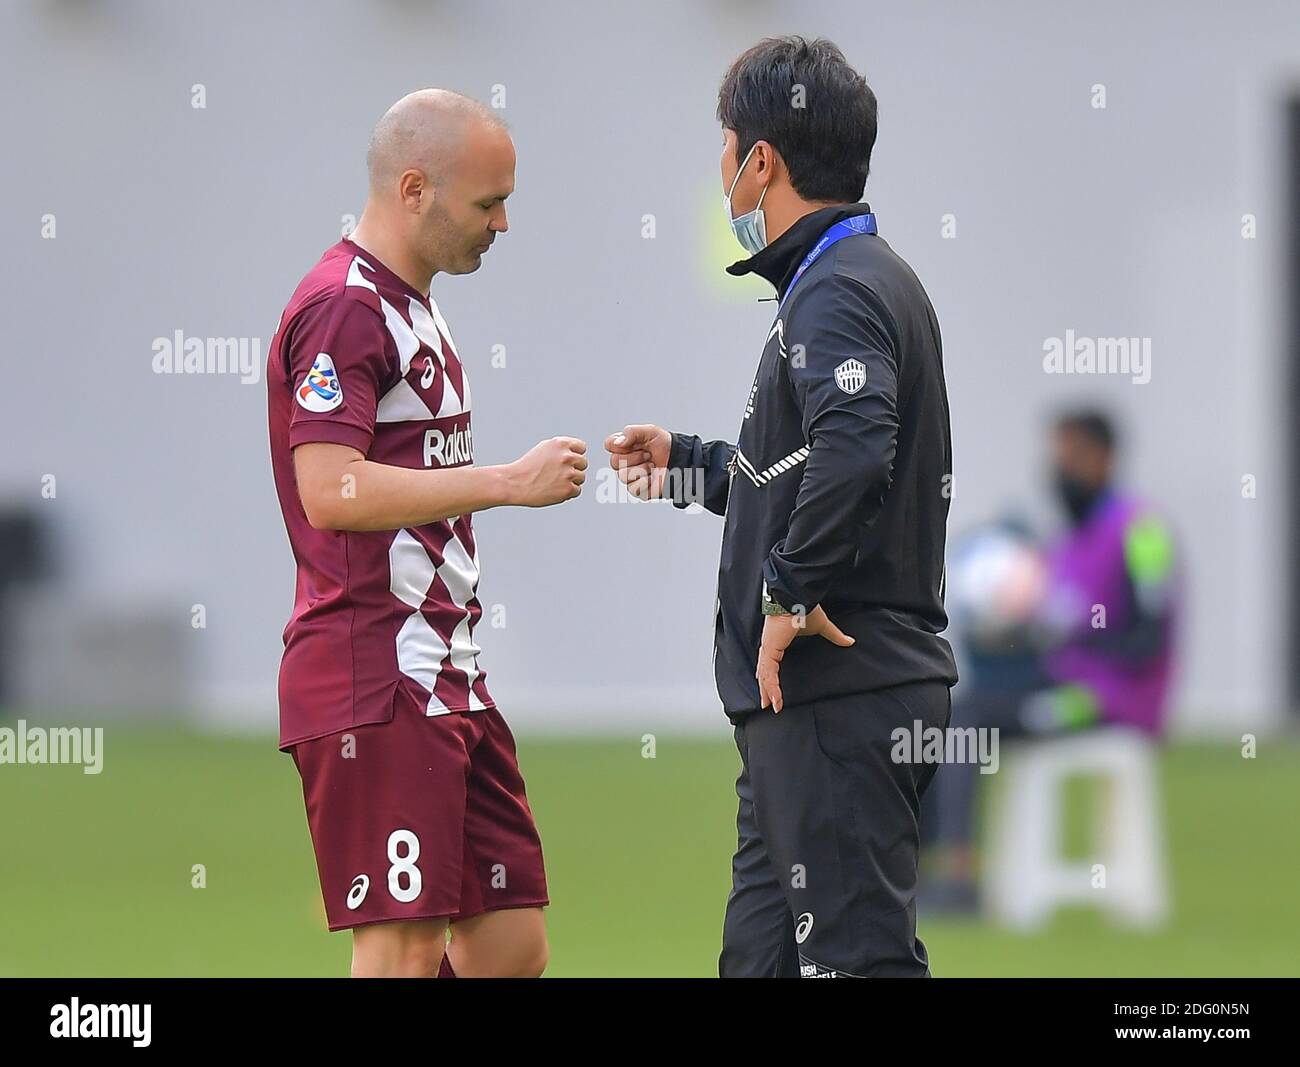 Doha, Qatar. 7th Dec, 2020. Andres Iniesta reacts with head coach Atsuhiro Miura of Vissel Kobe during the round of 16 match of the AFC Champions League between Shanghai SIPG FC of China and Vissel Kobe of Japan in Doha, Qatar, Dec. 7, 2020. Credit: Nikku/Xinhua/Alamy Live News Stock Photo